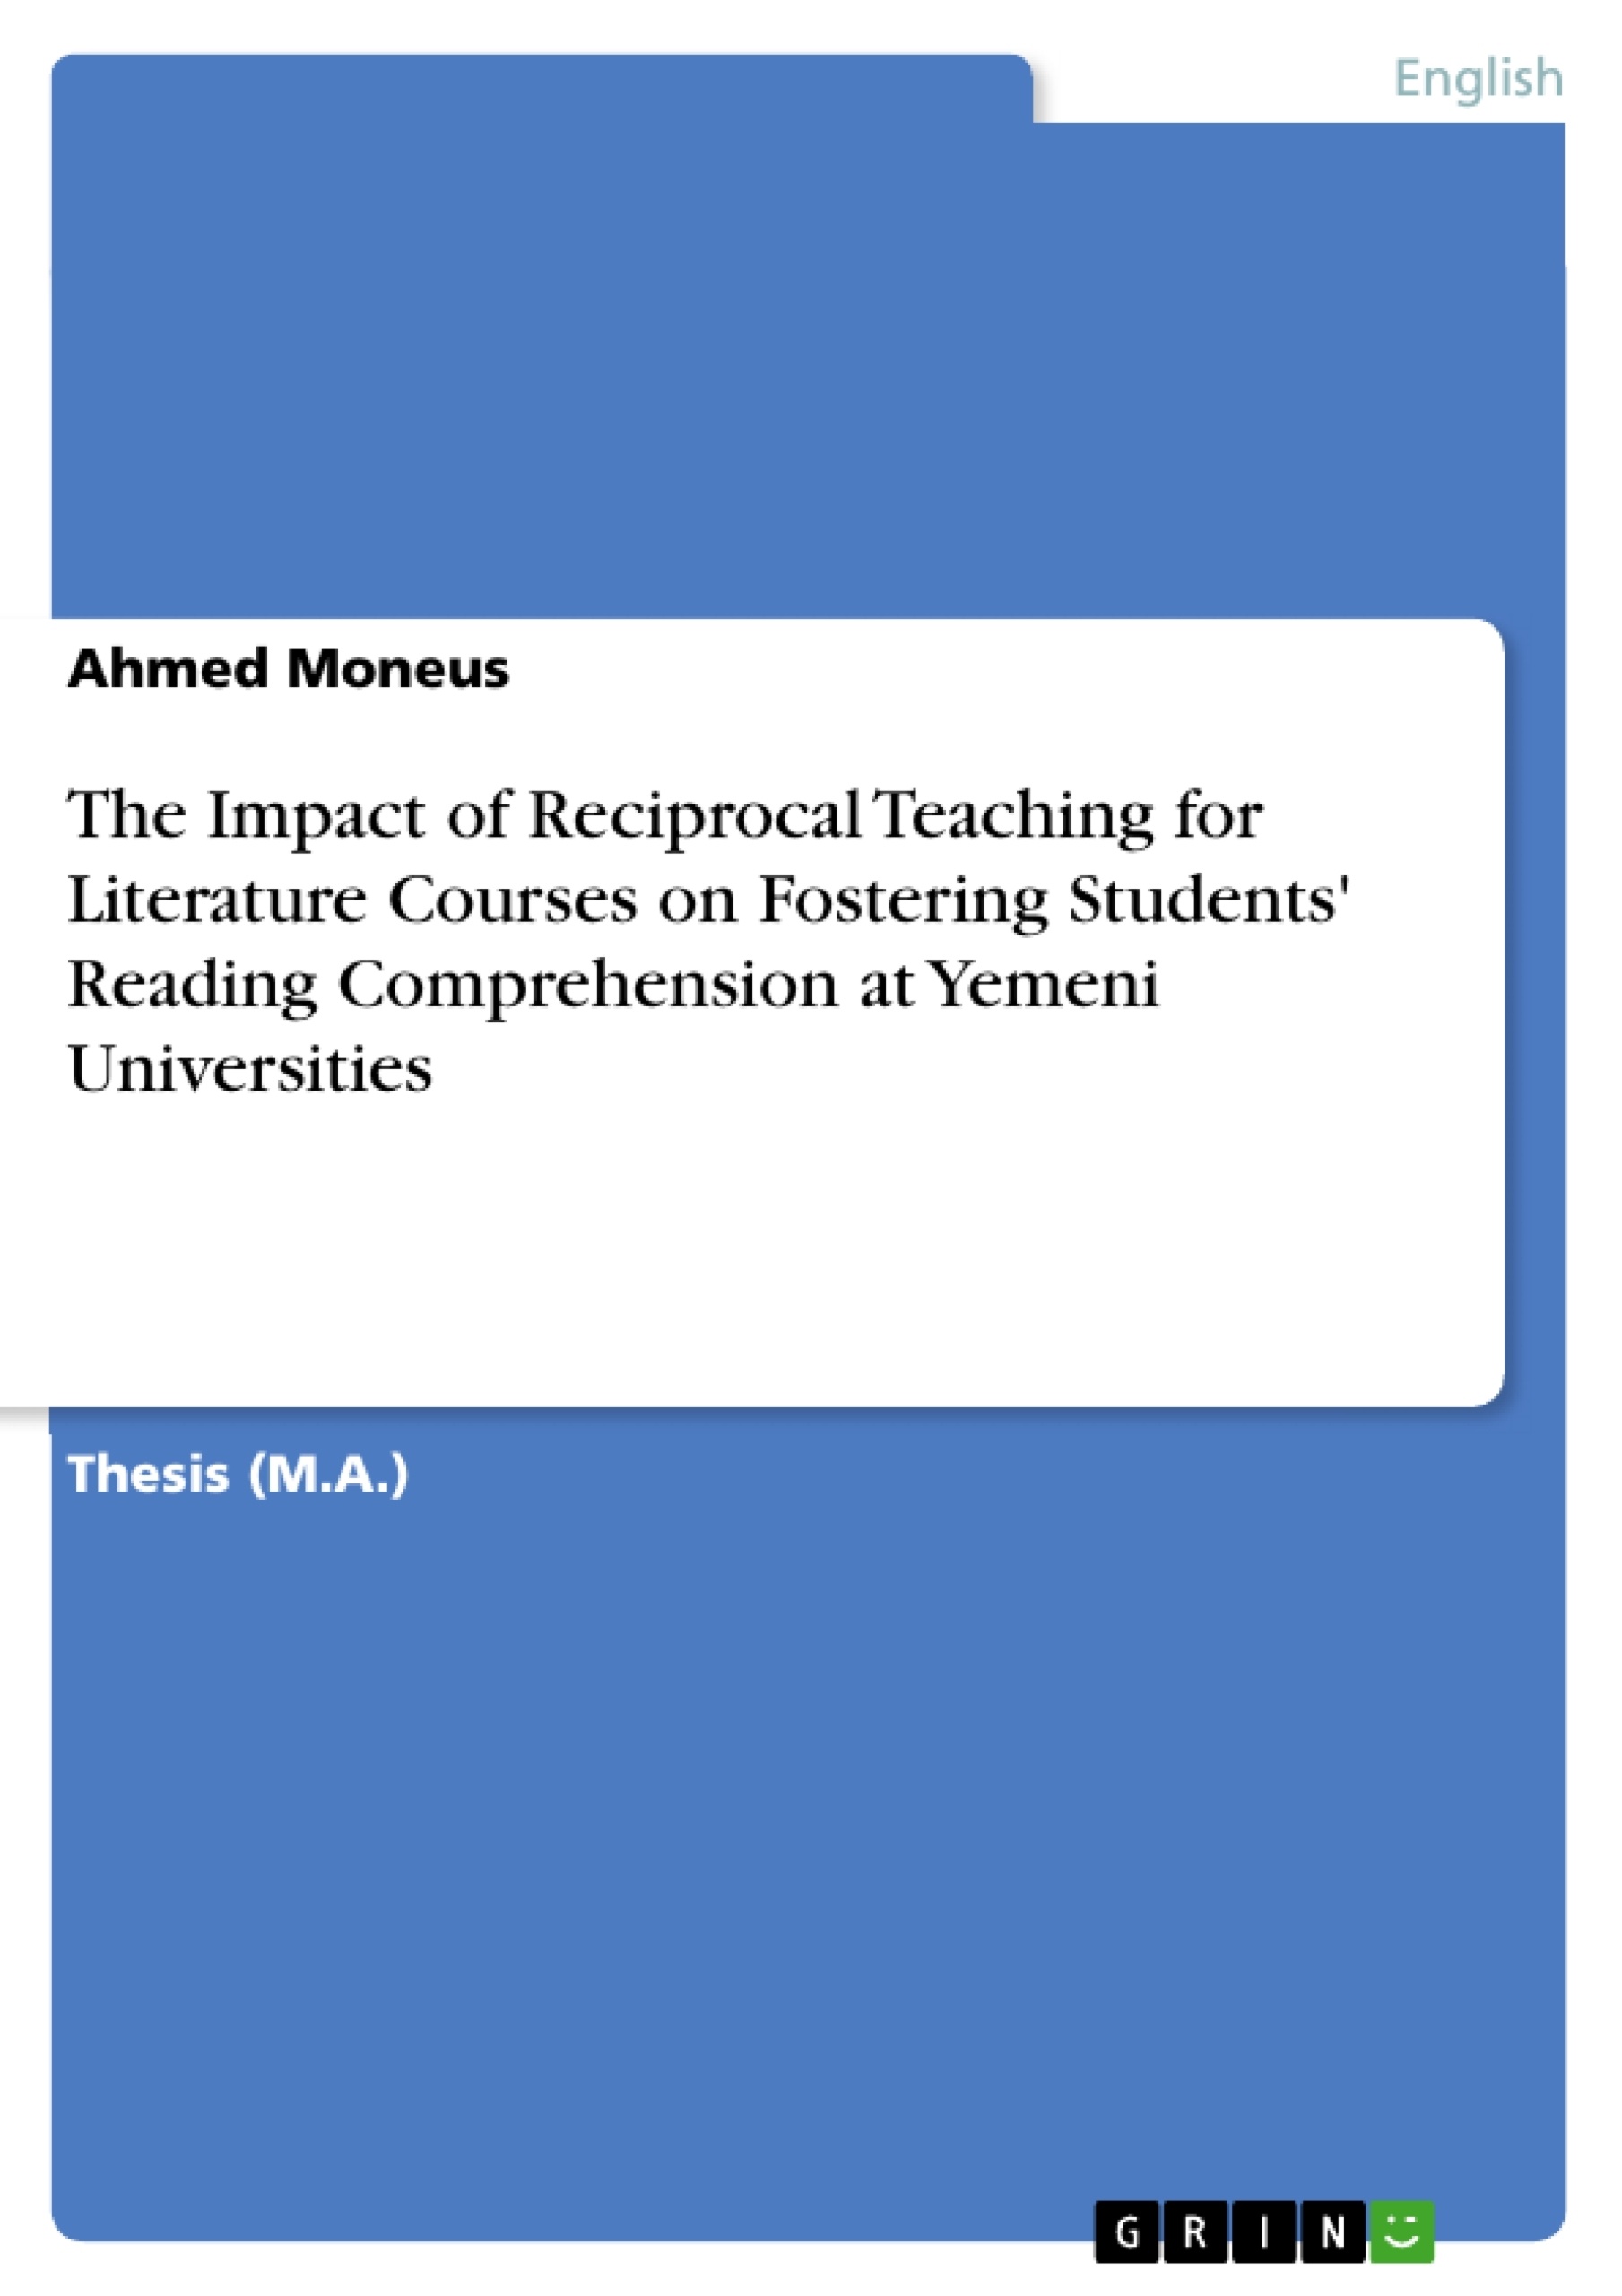 Título: The Impact of Reciprocal Teaching for Literature Courses on Fostering Students' Reading Comprehension at Yemeni Universities